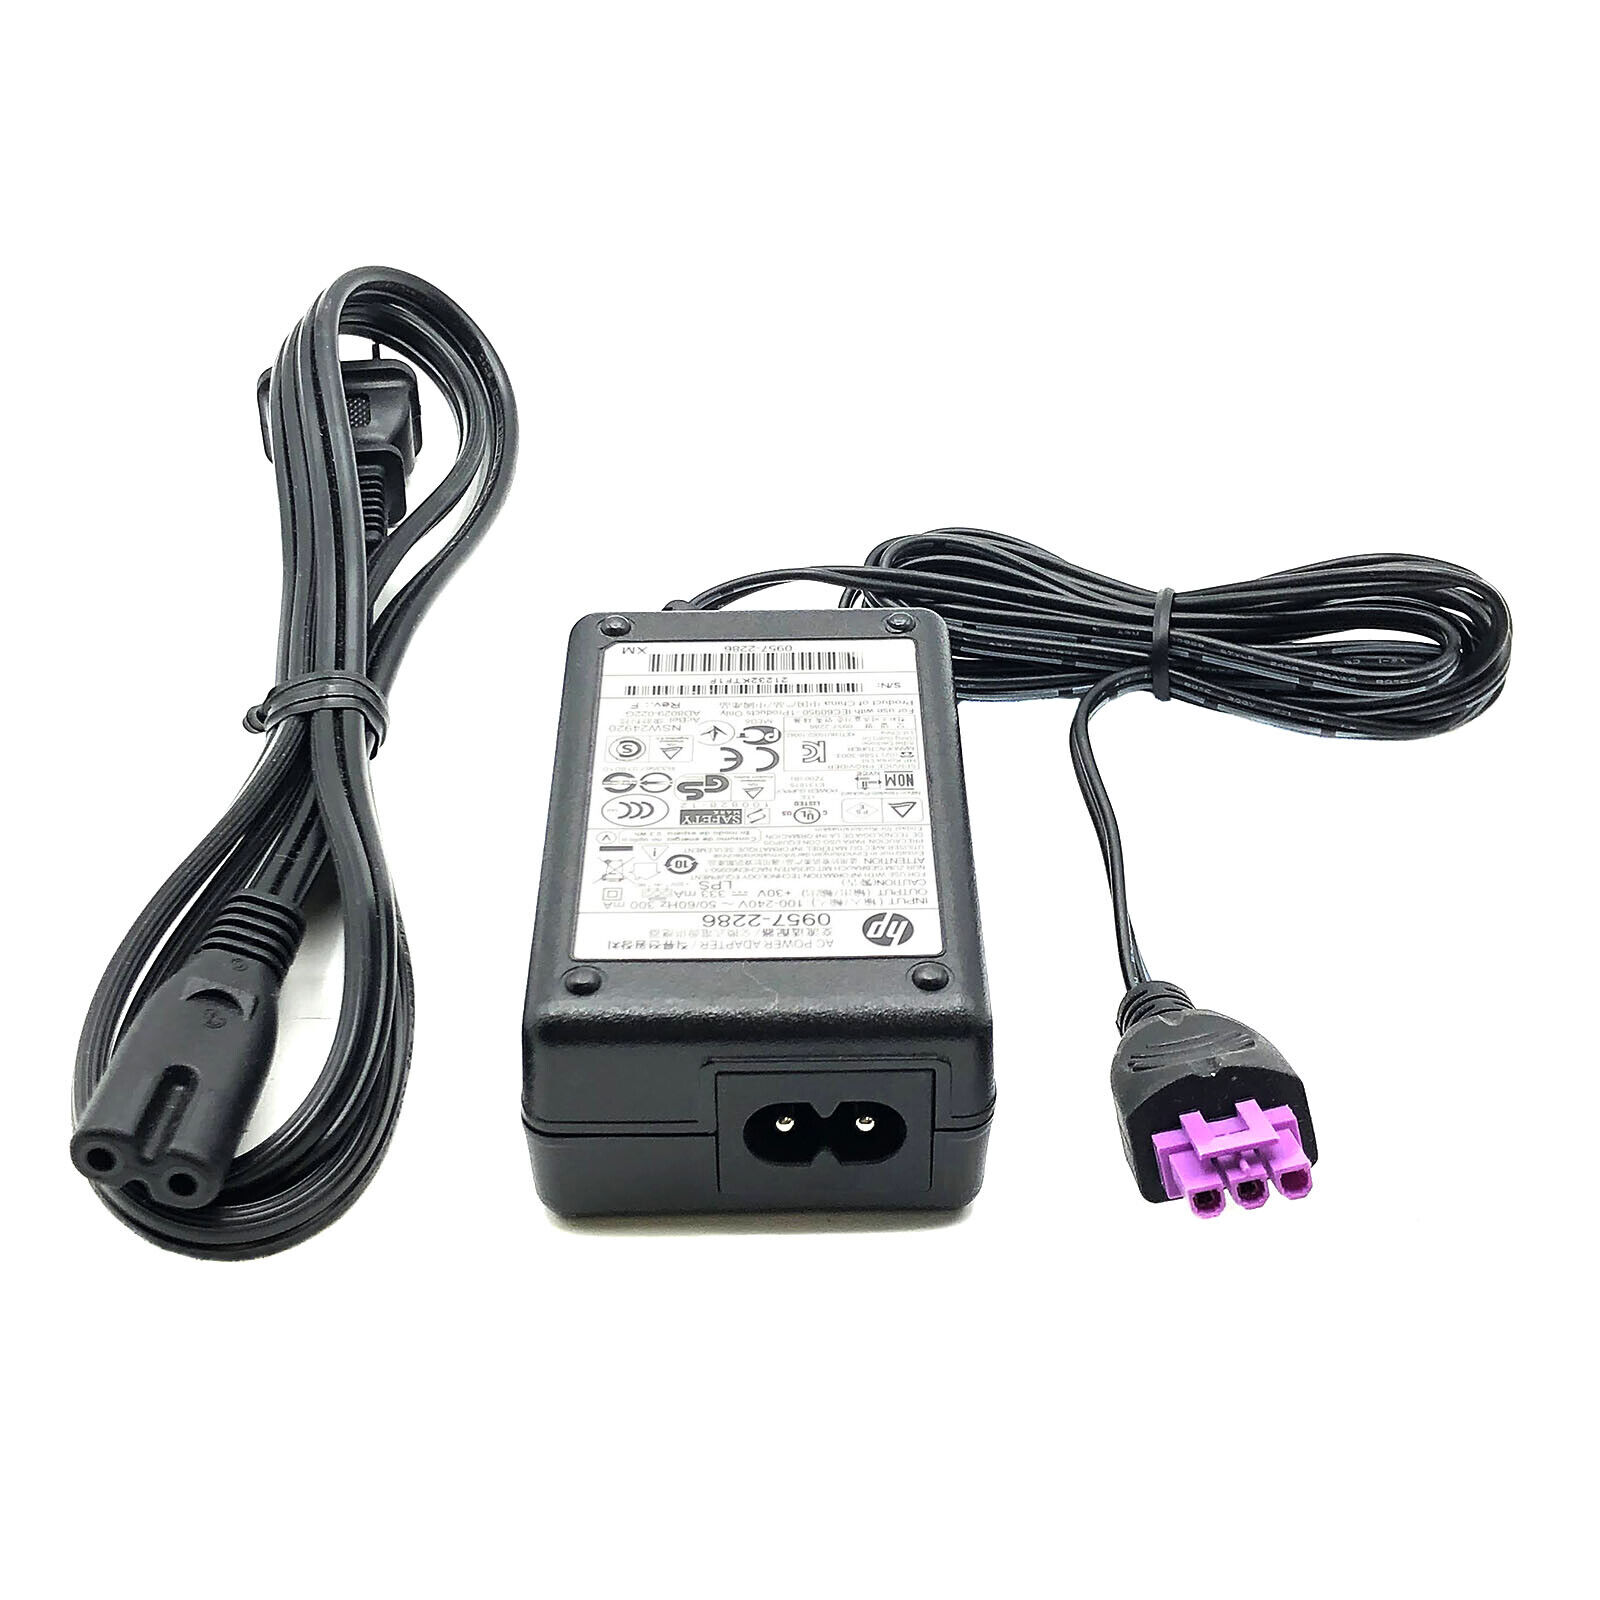 NEW Authentic 10W HP AC DC Adapter Model 0957-2286 30V 333mA (0.33 A) w/Cord OEM